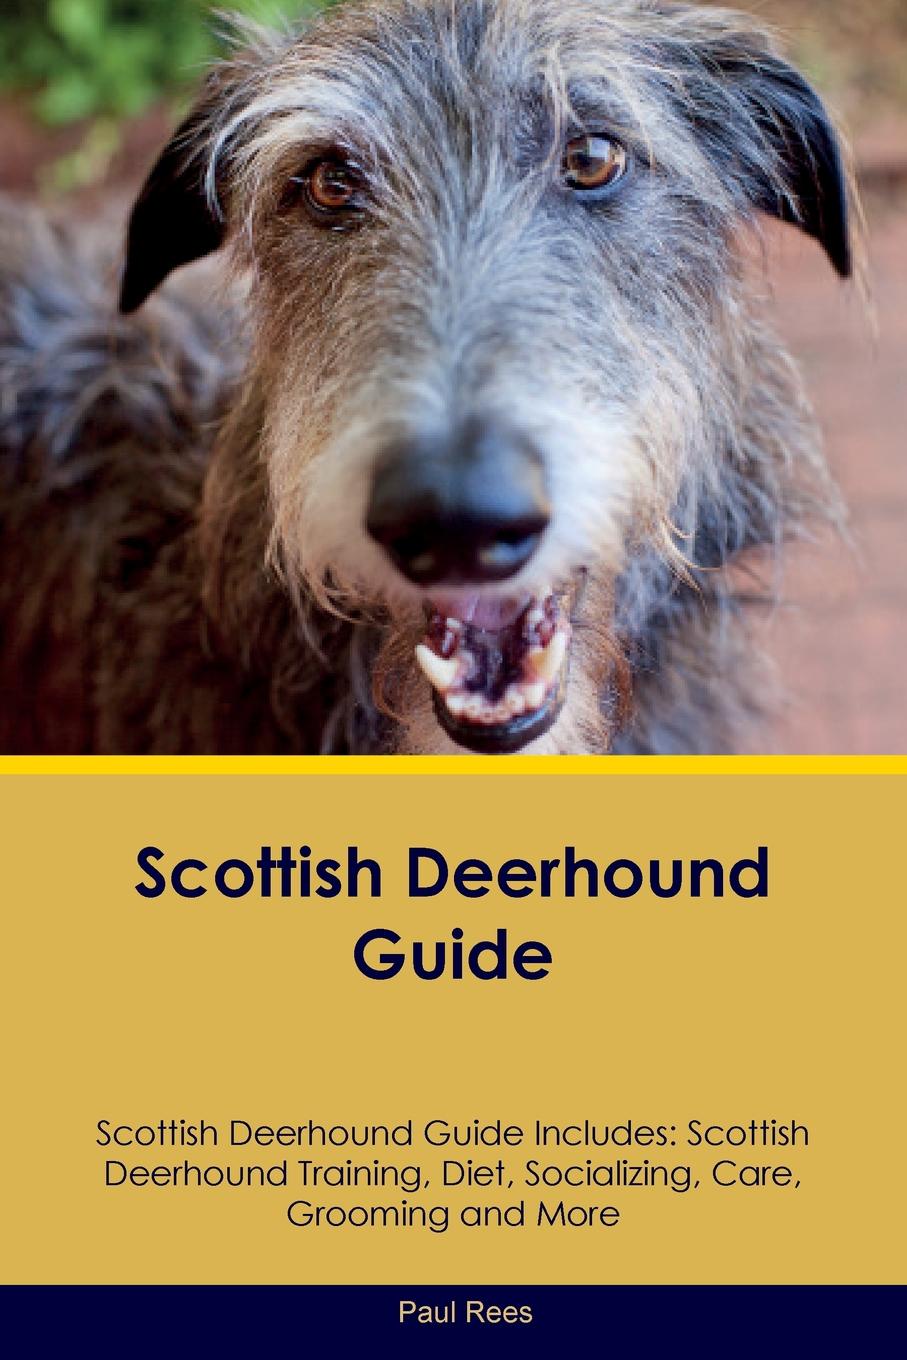 Scottish Deerhound Guide Scottish Deerhound Guide Includes. Scottish Deerhound Training, Diet, Socializing, Care, Grooming, Breeding and More